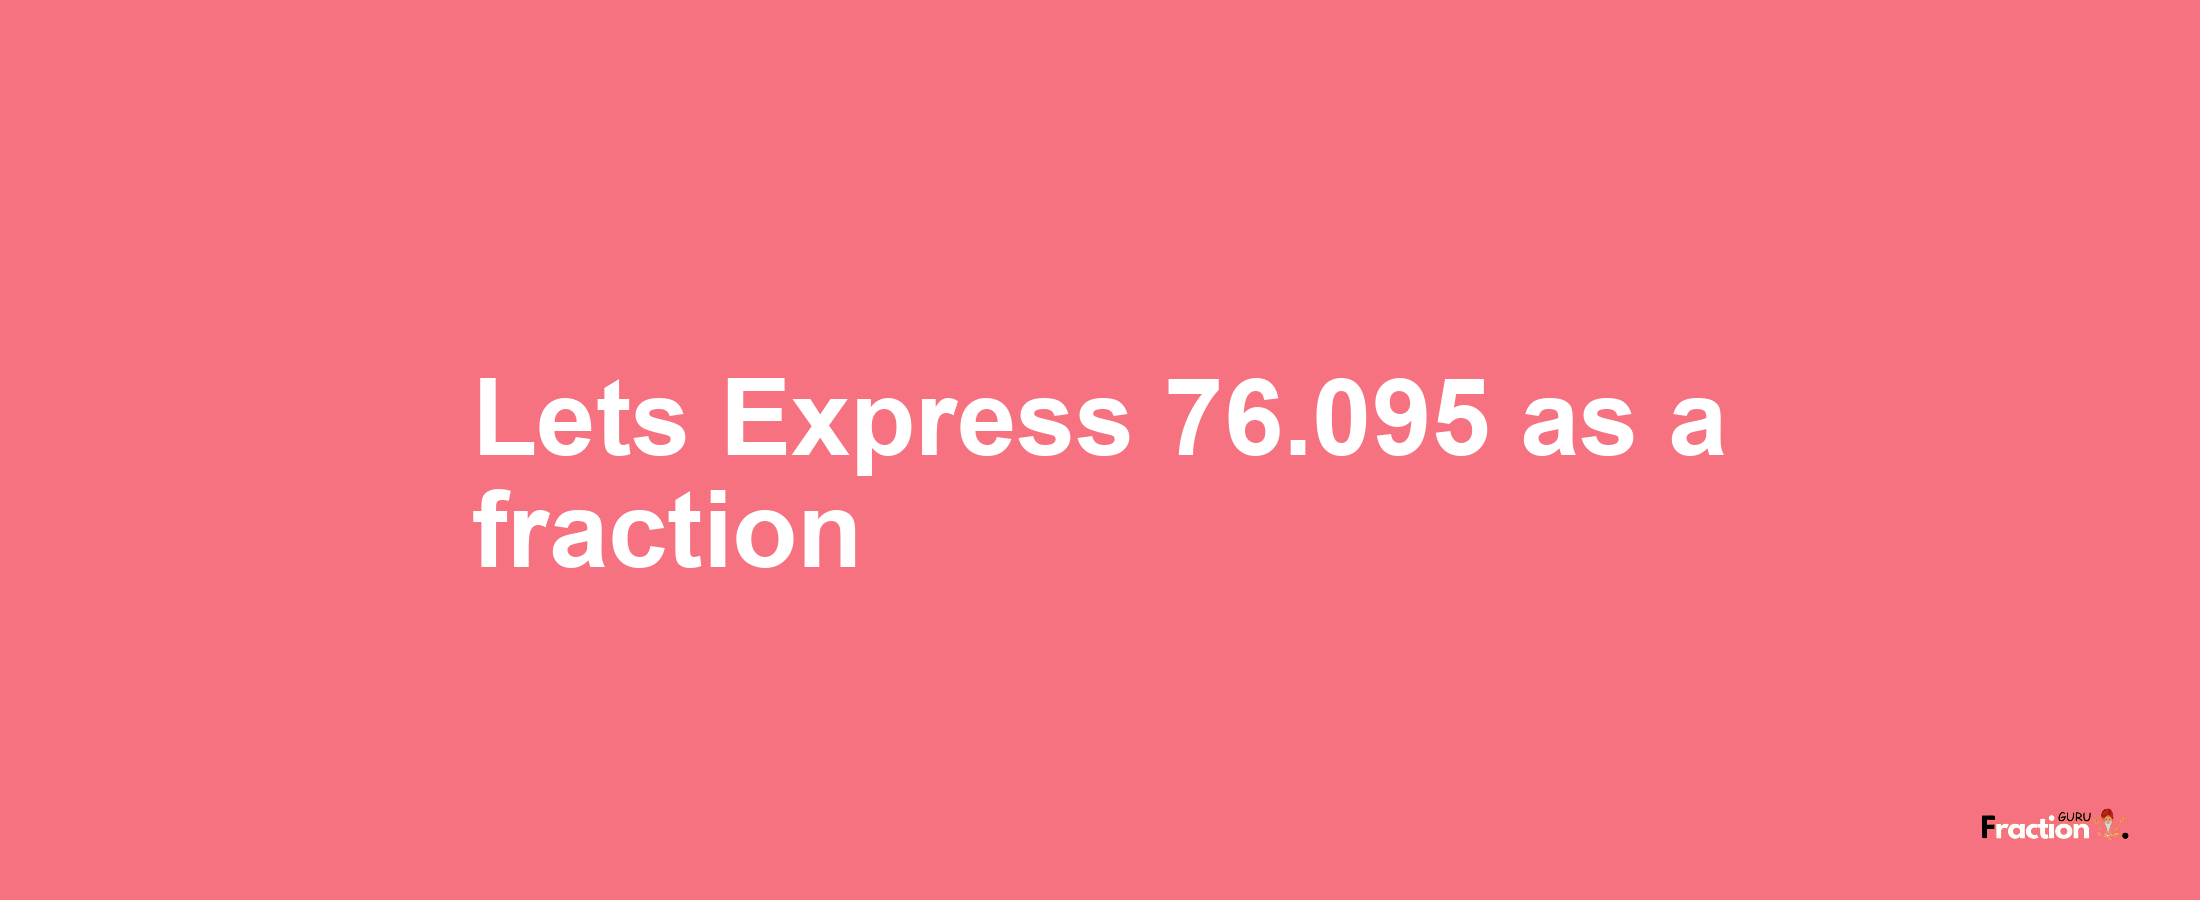 Lets Express 76.095 as afraction